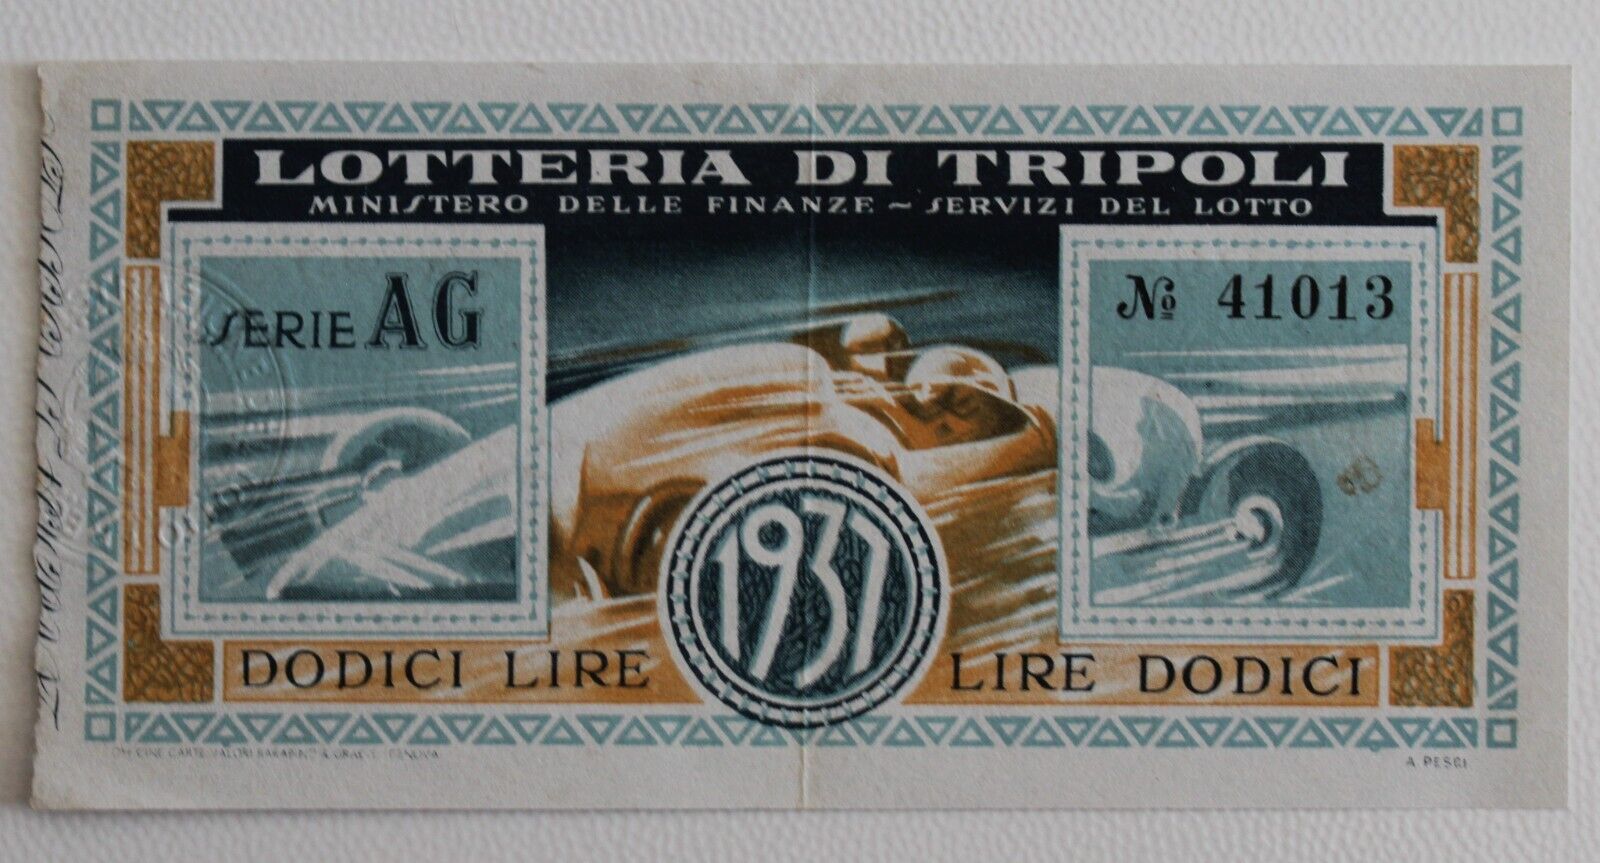 1937 Lottery By Tripoli + Ticket By L.12 + Series Ag N.41013-A704